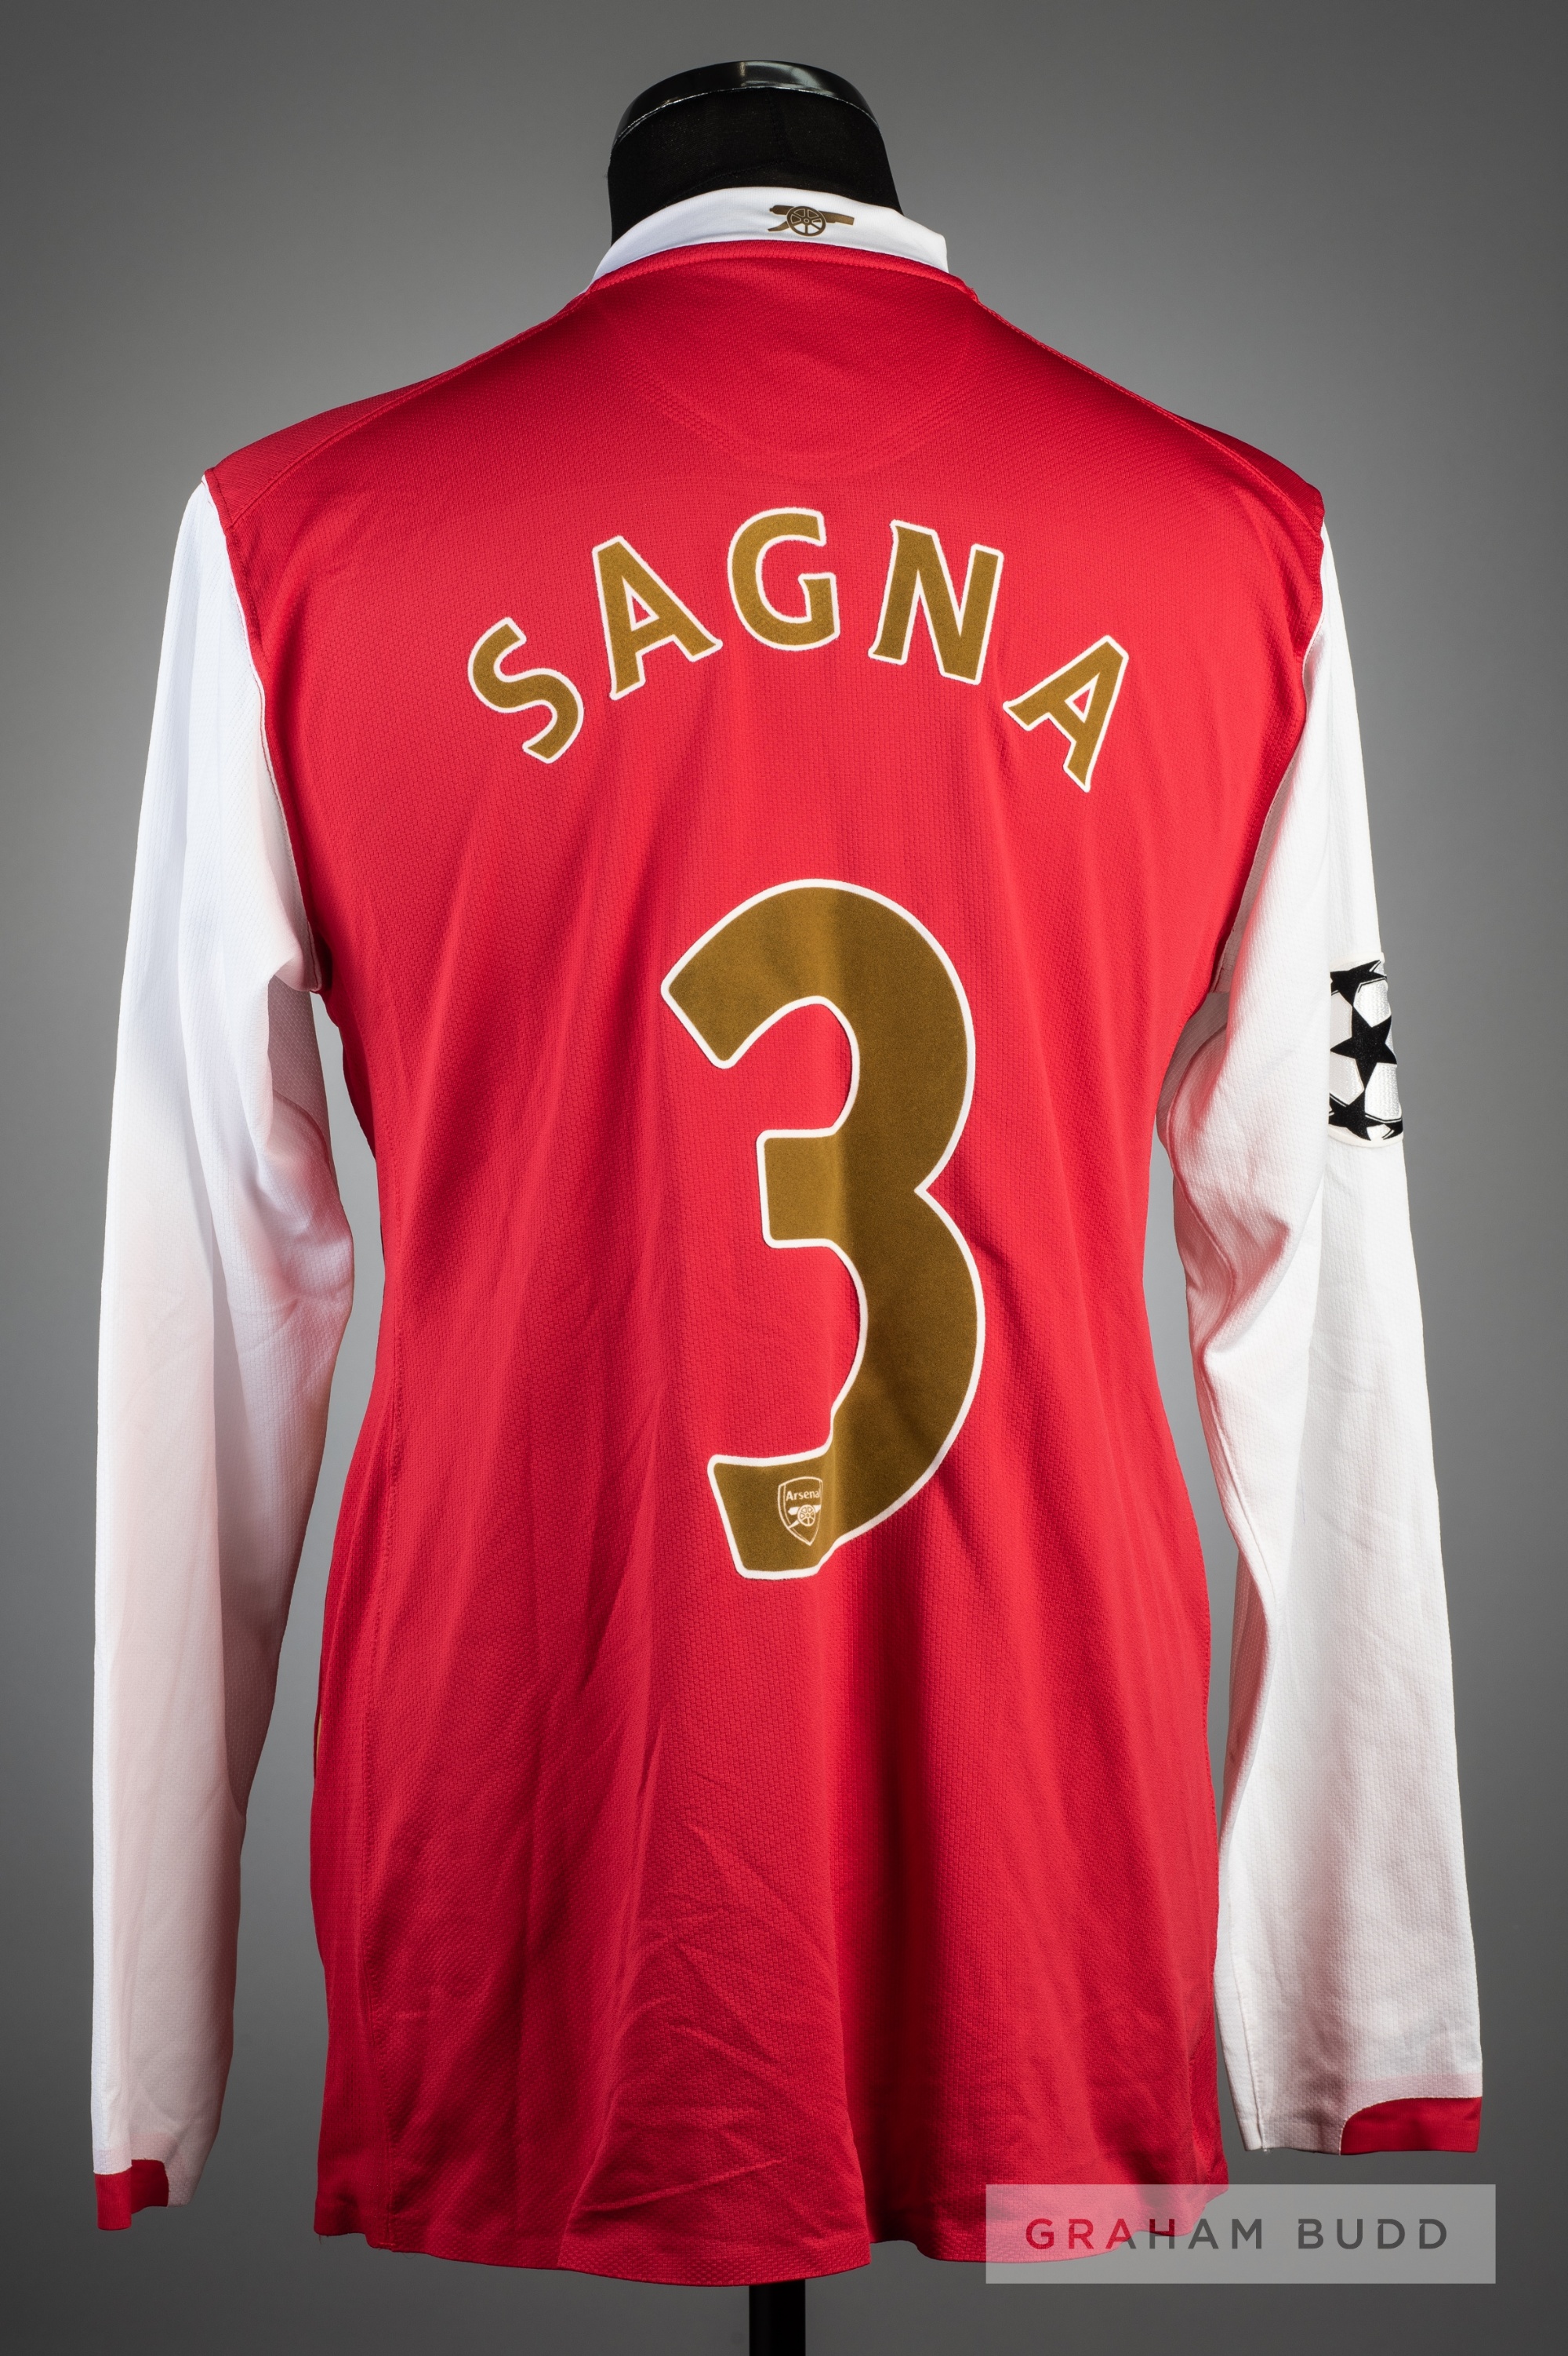 Bacary Sagna red and white Arsenal No.3 jersey v Bucharest in the UEFA Champions League at - Image 2 of 2